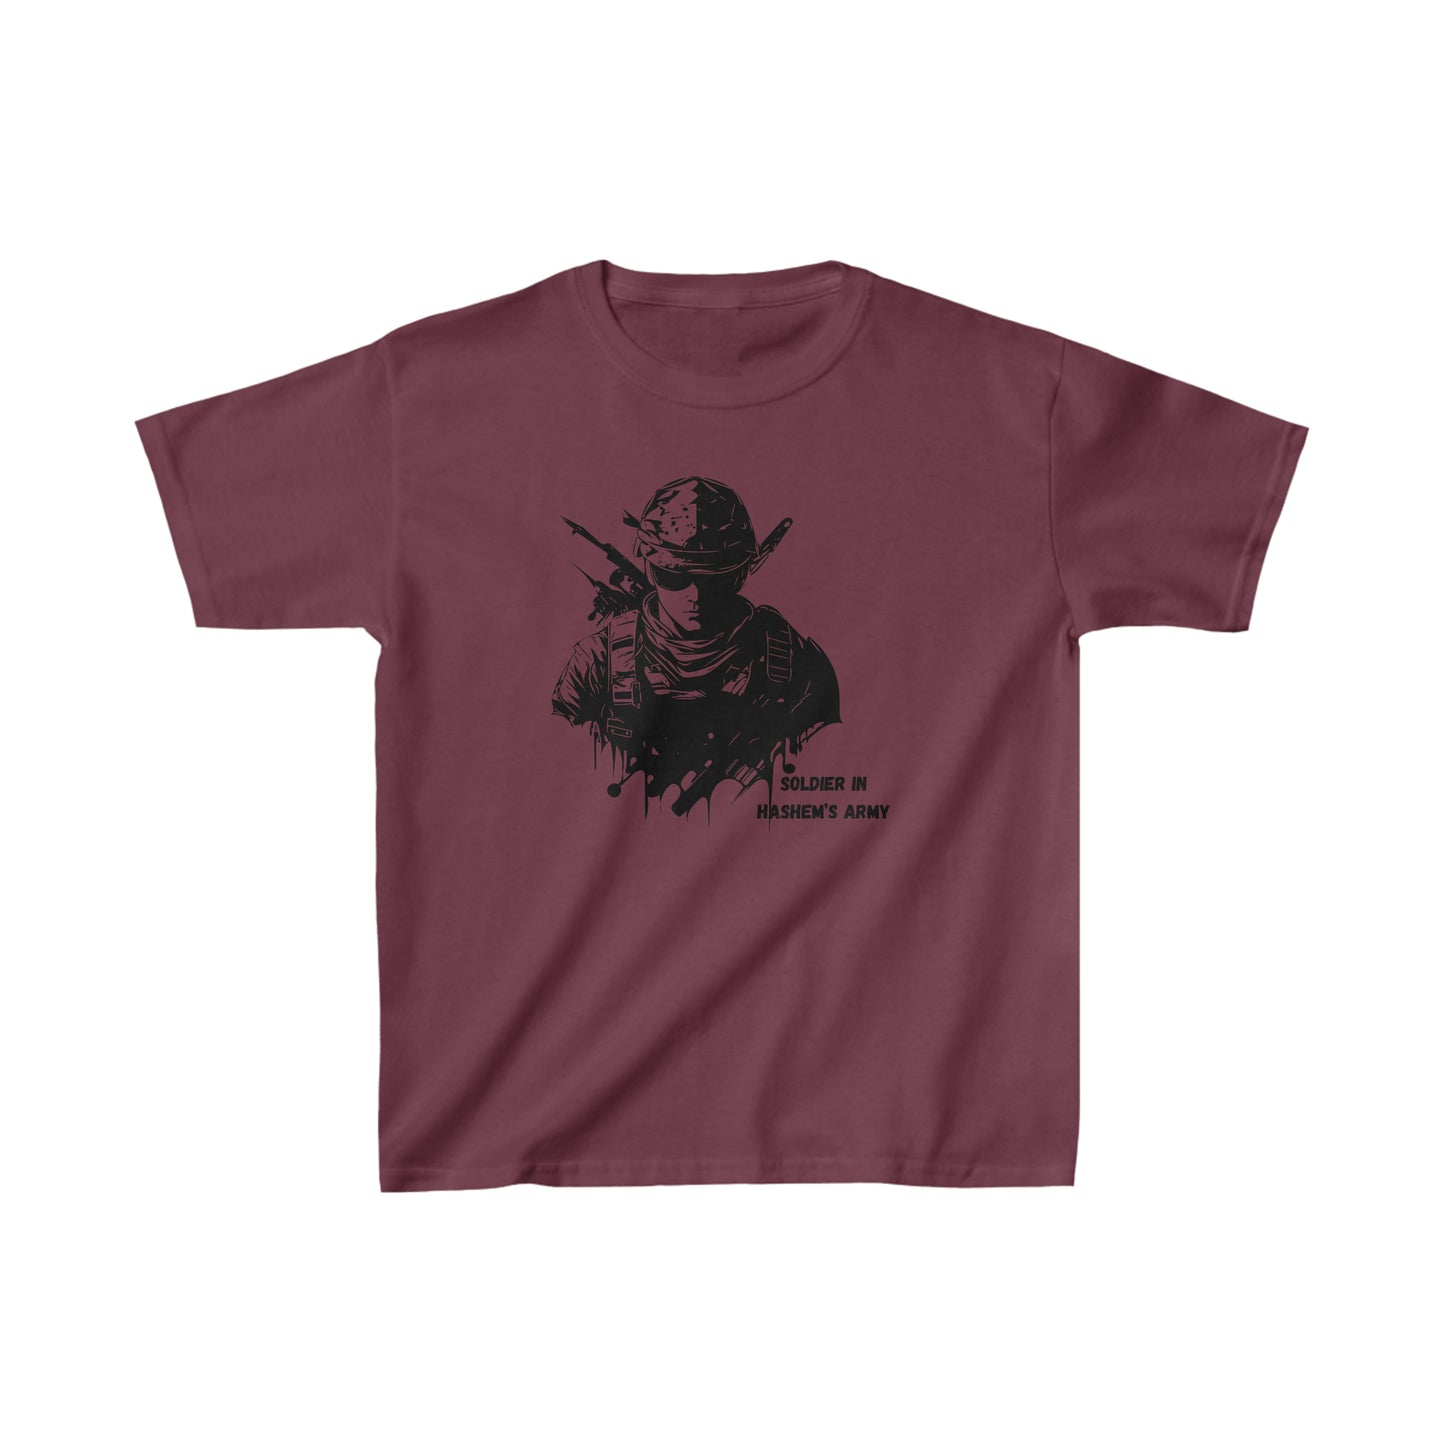 Boys' Soldier in Hashem's Army (large image) short sleeve t-shirt